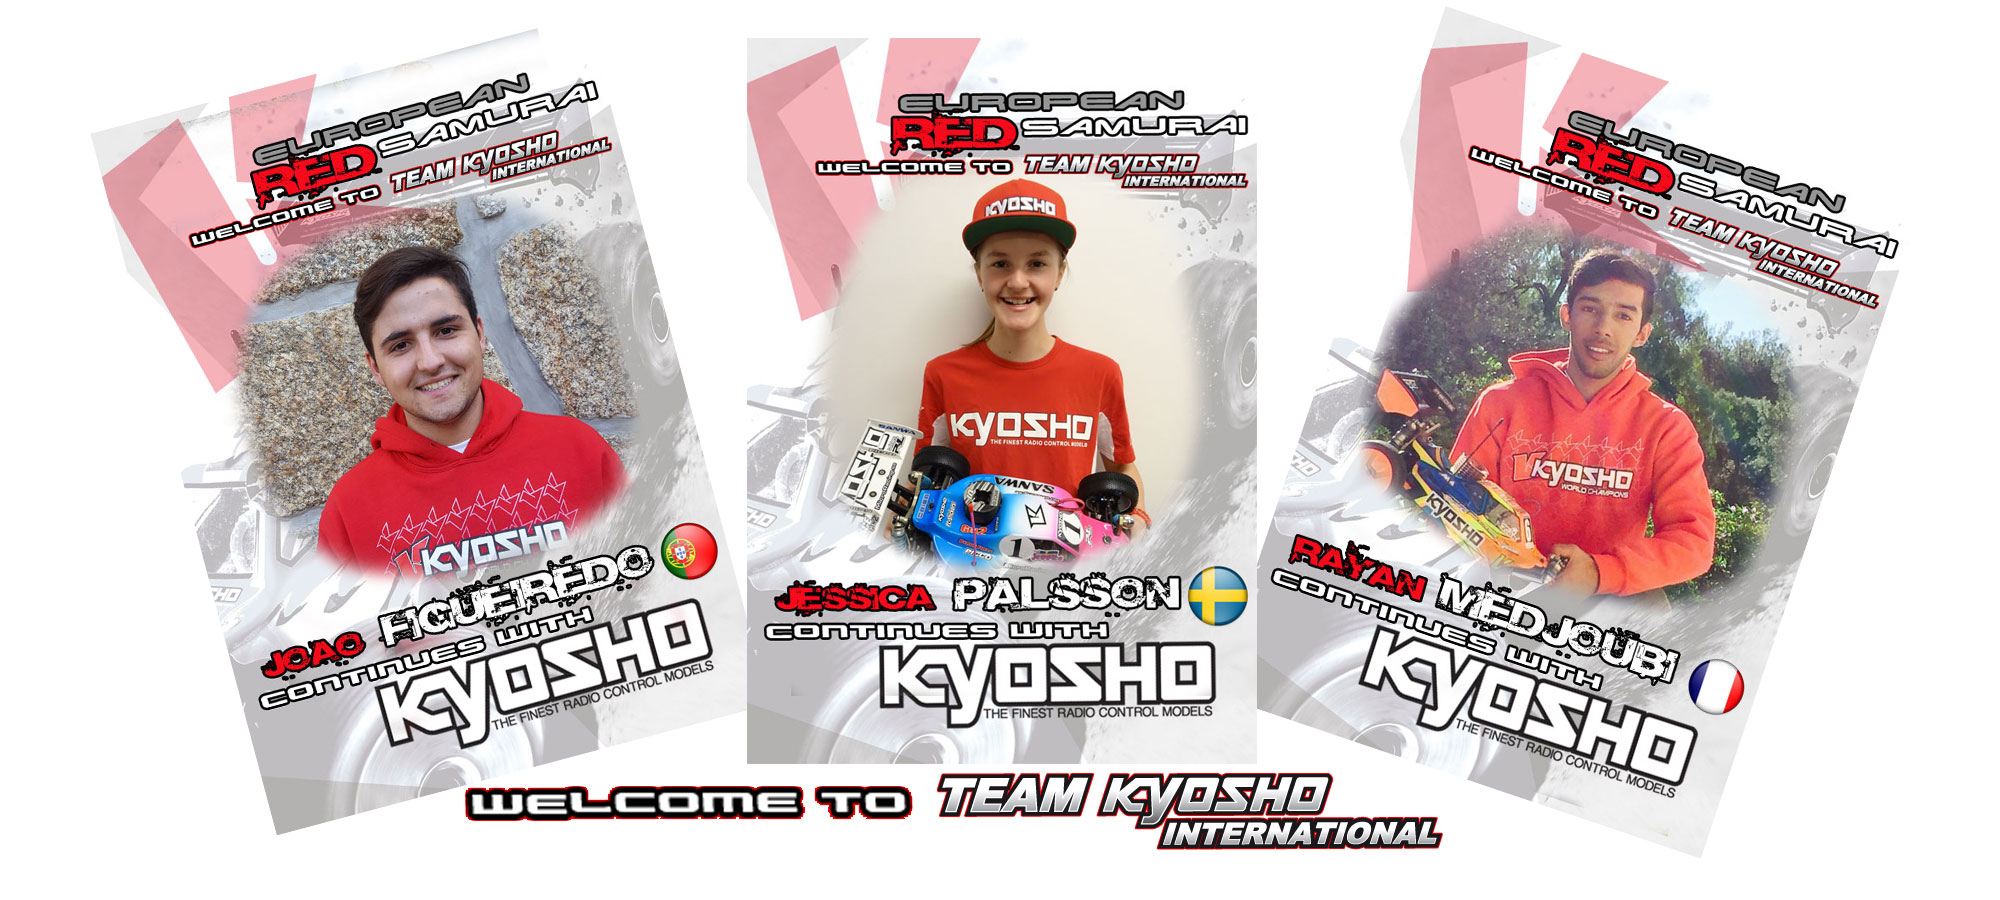 [:en]Jessica, João and Rayan continue with Kyosho [:fr]Jessica, João et Rayan continuent avec Kyosho [:de]Jessica, João and Rayan continue with Kyosho [:]